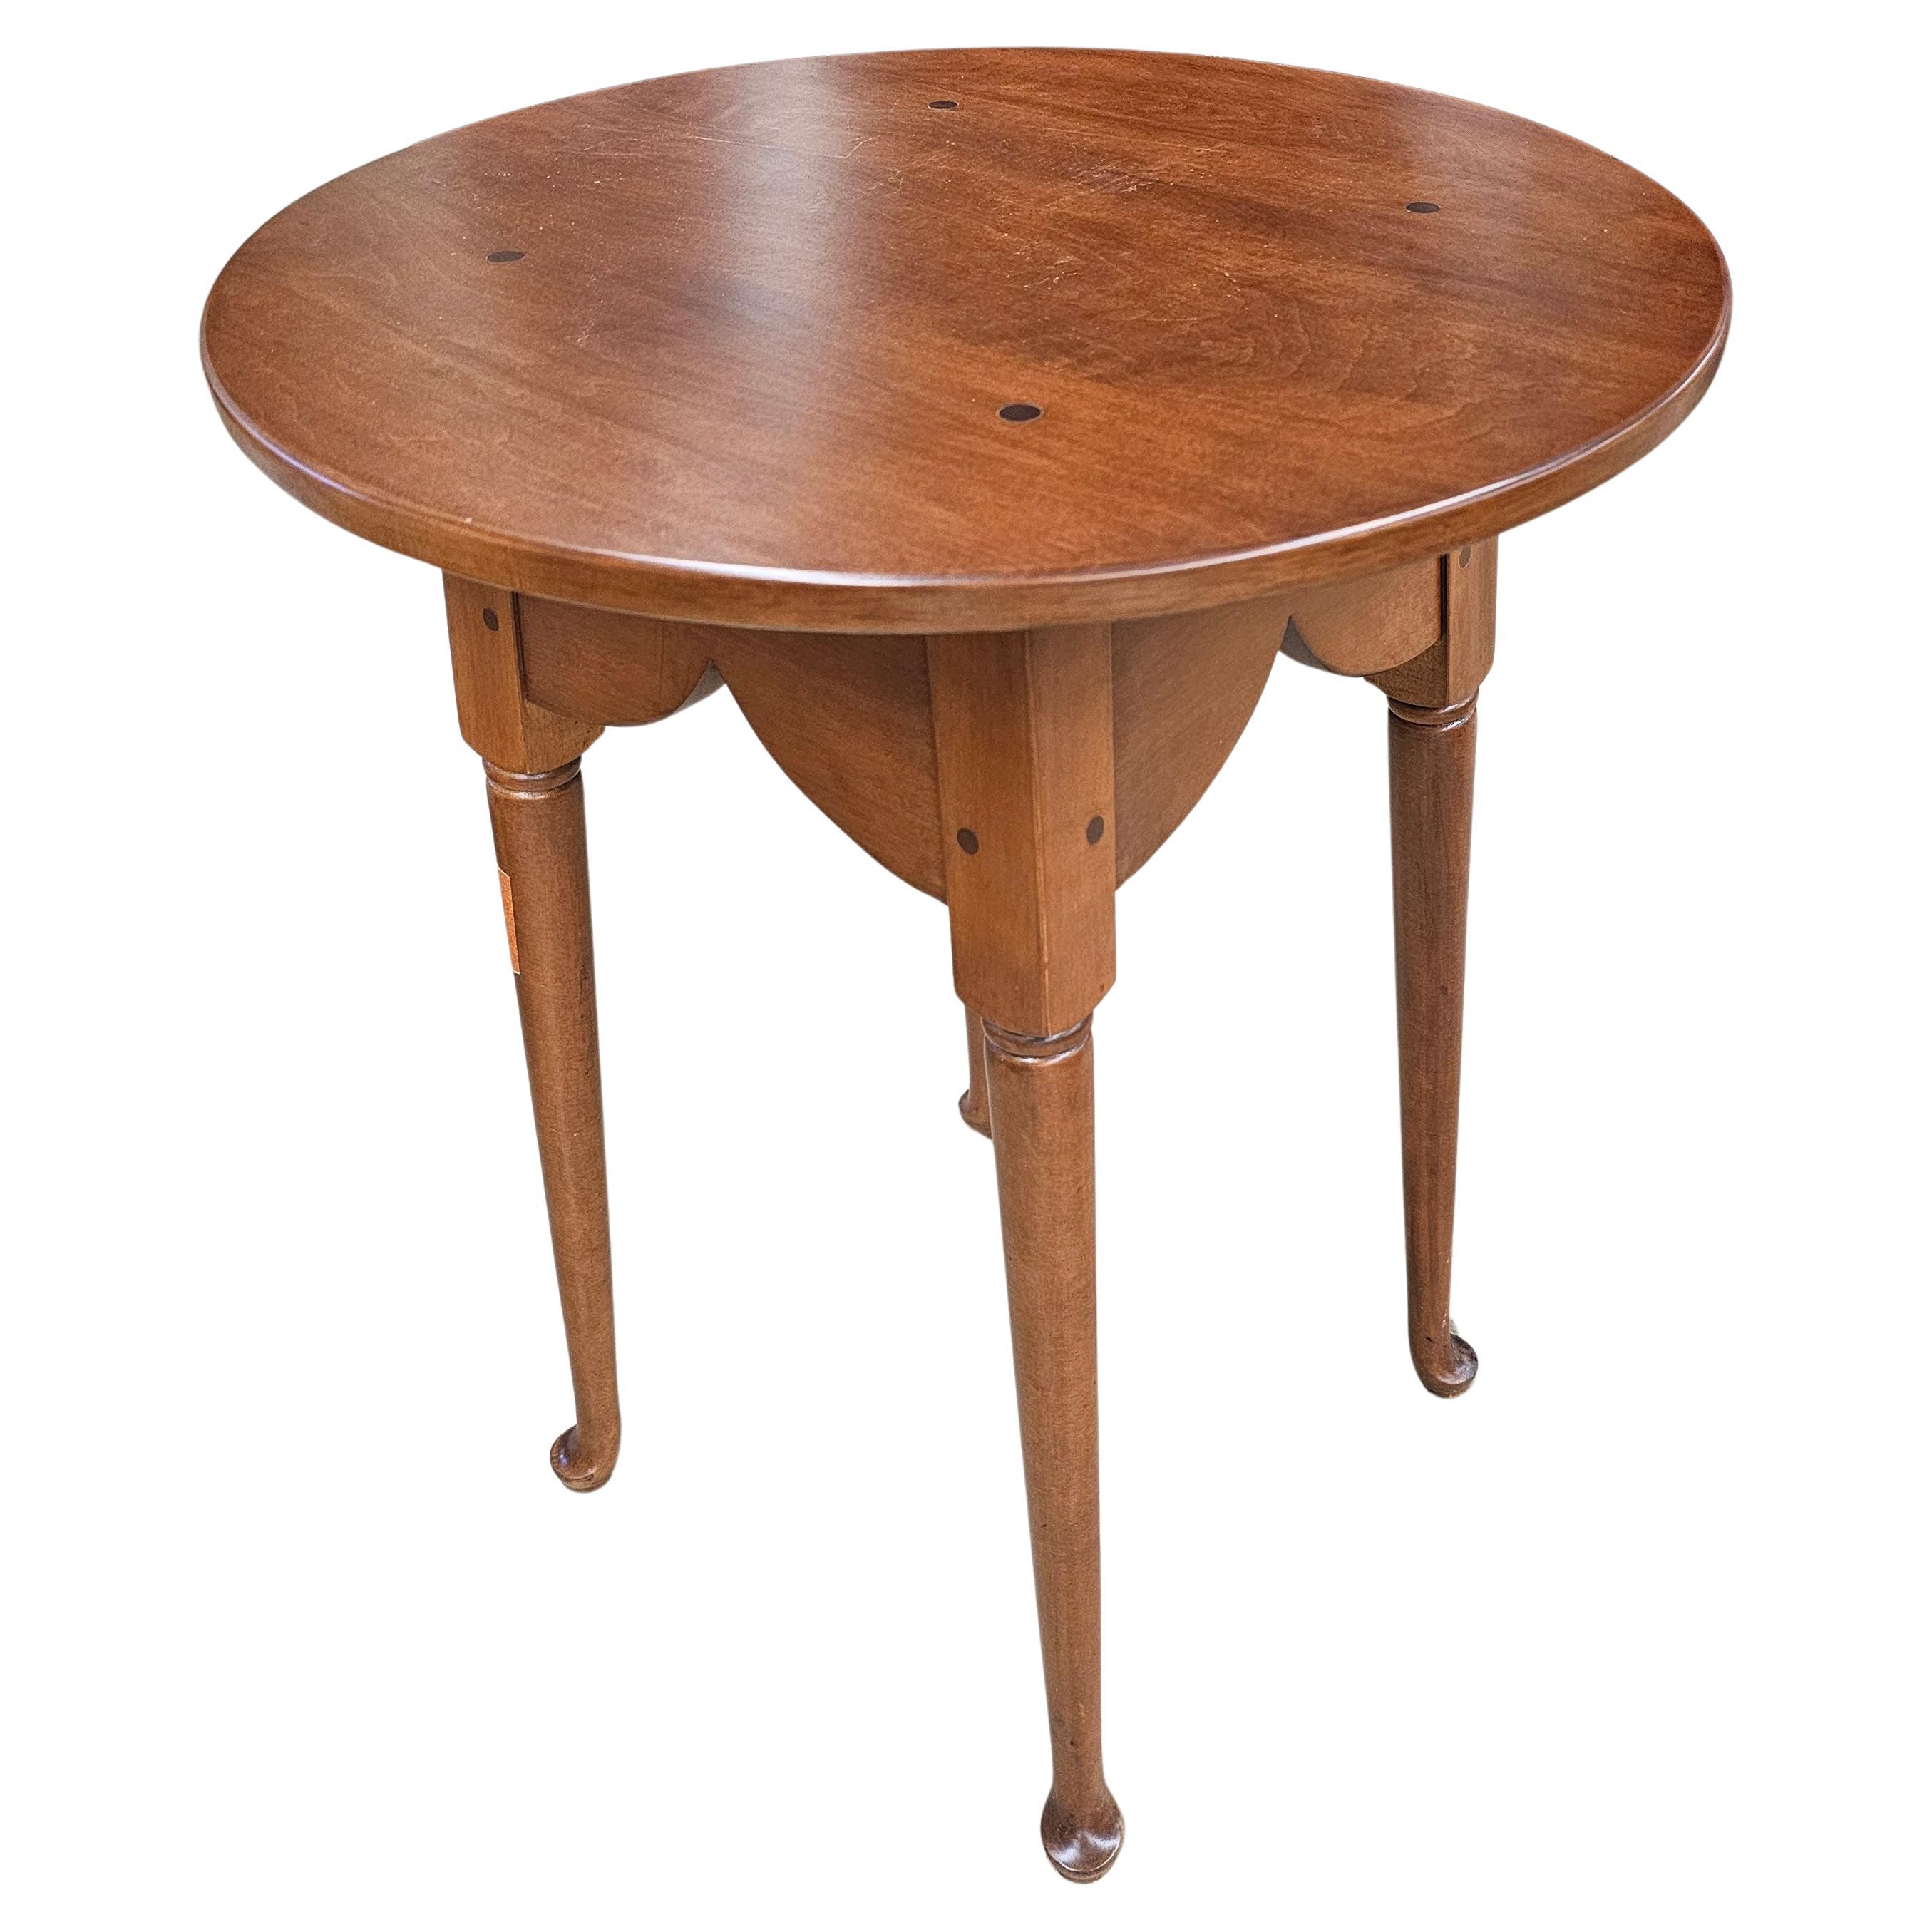 20th Century Heritage Furniture Heirloom Maple Round Side Table in great vintage condition. Measures 20.25